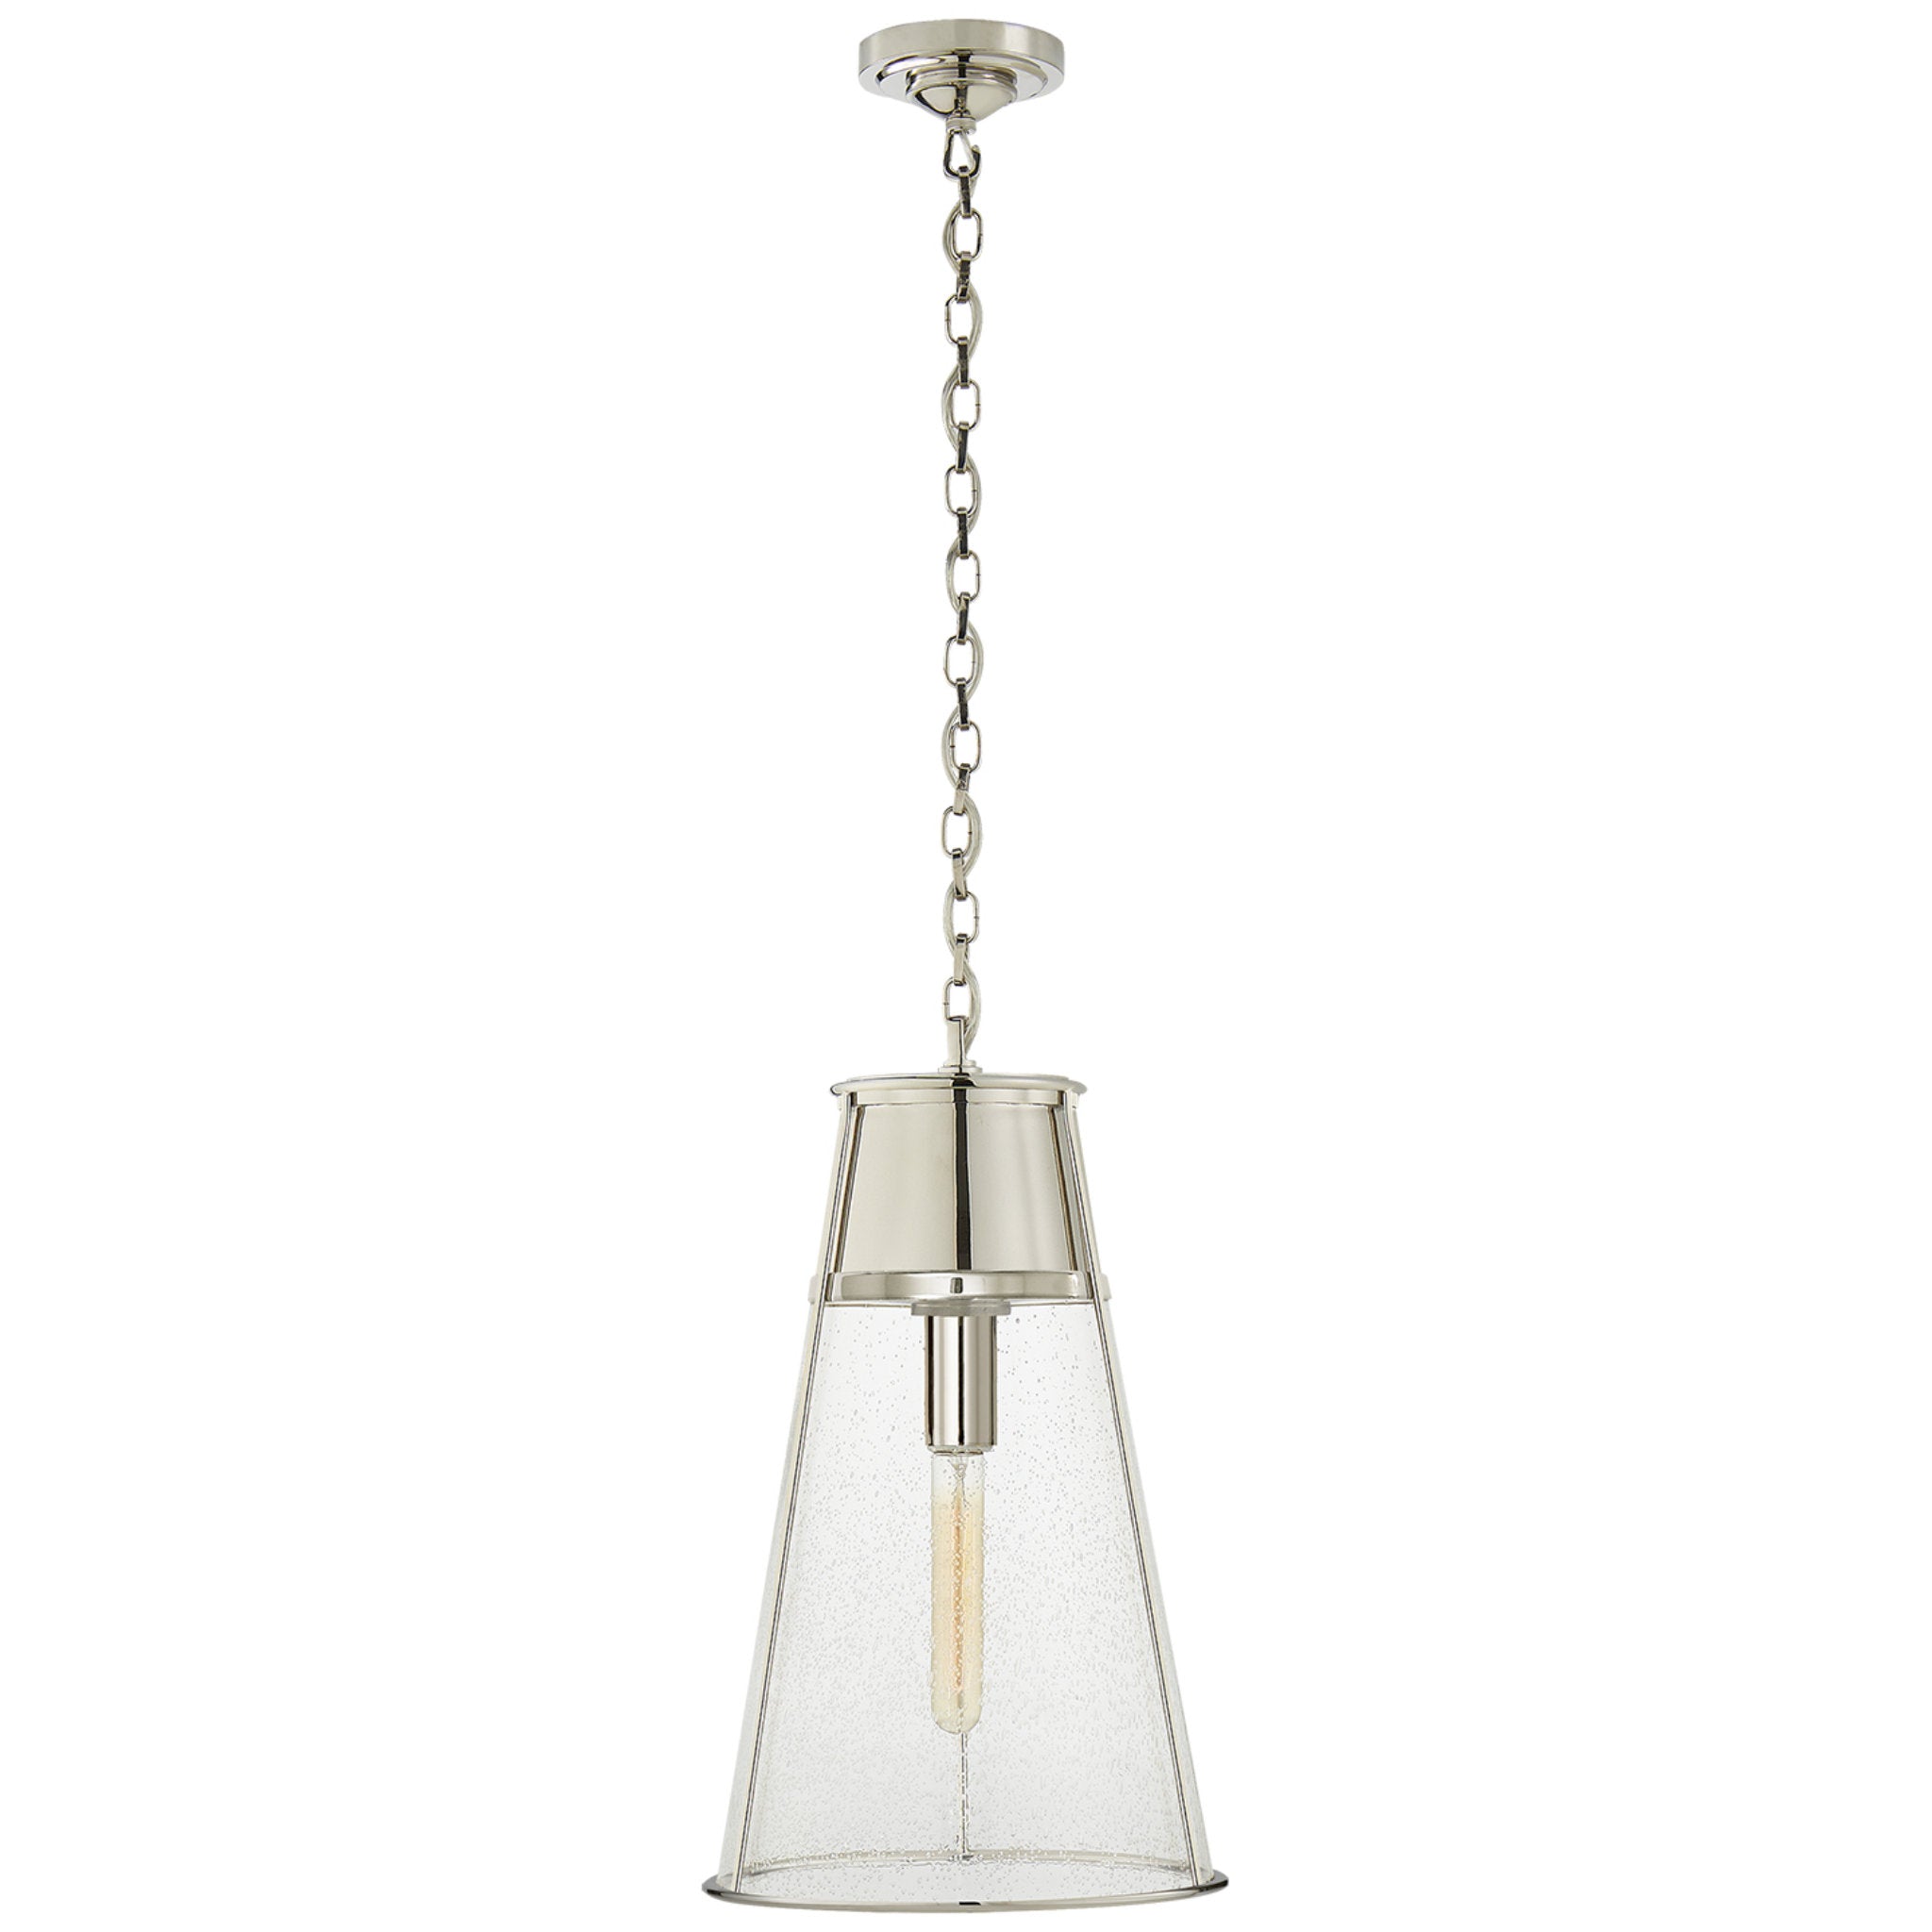 Thomas O'Brien Robinson Large Pendant in Polished Nickel with Seeded Glass